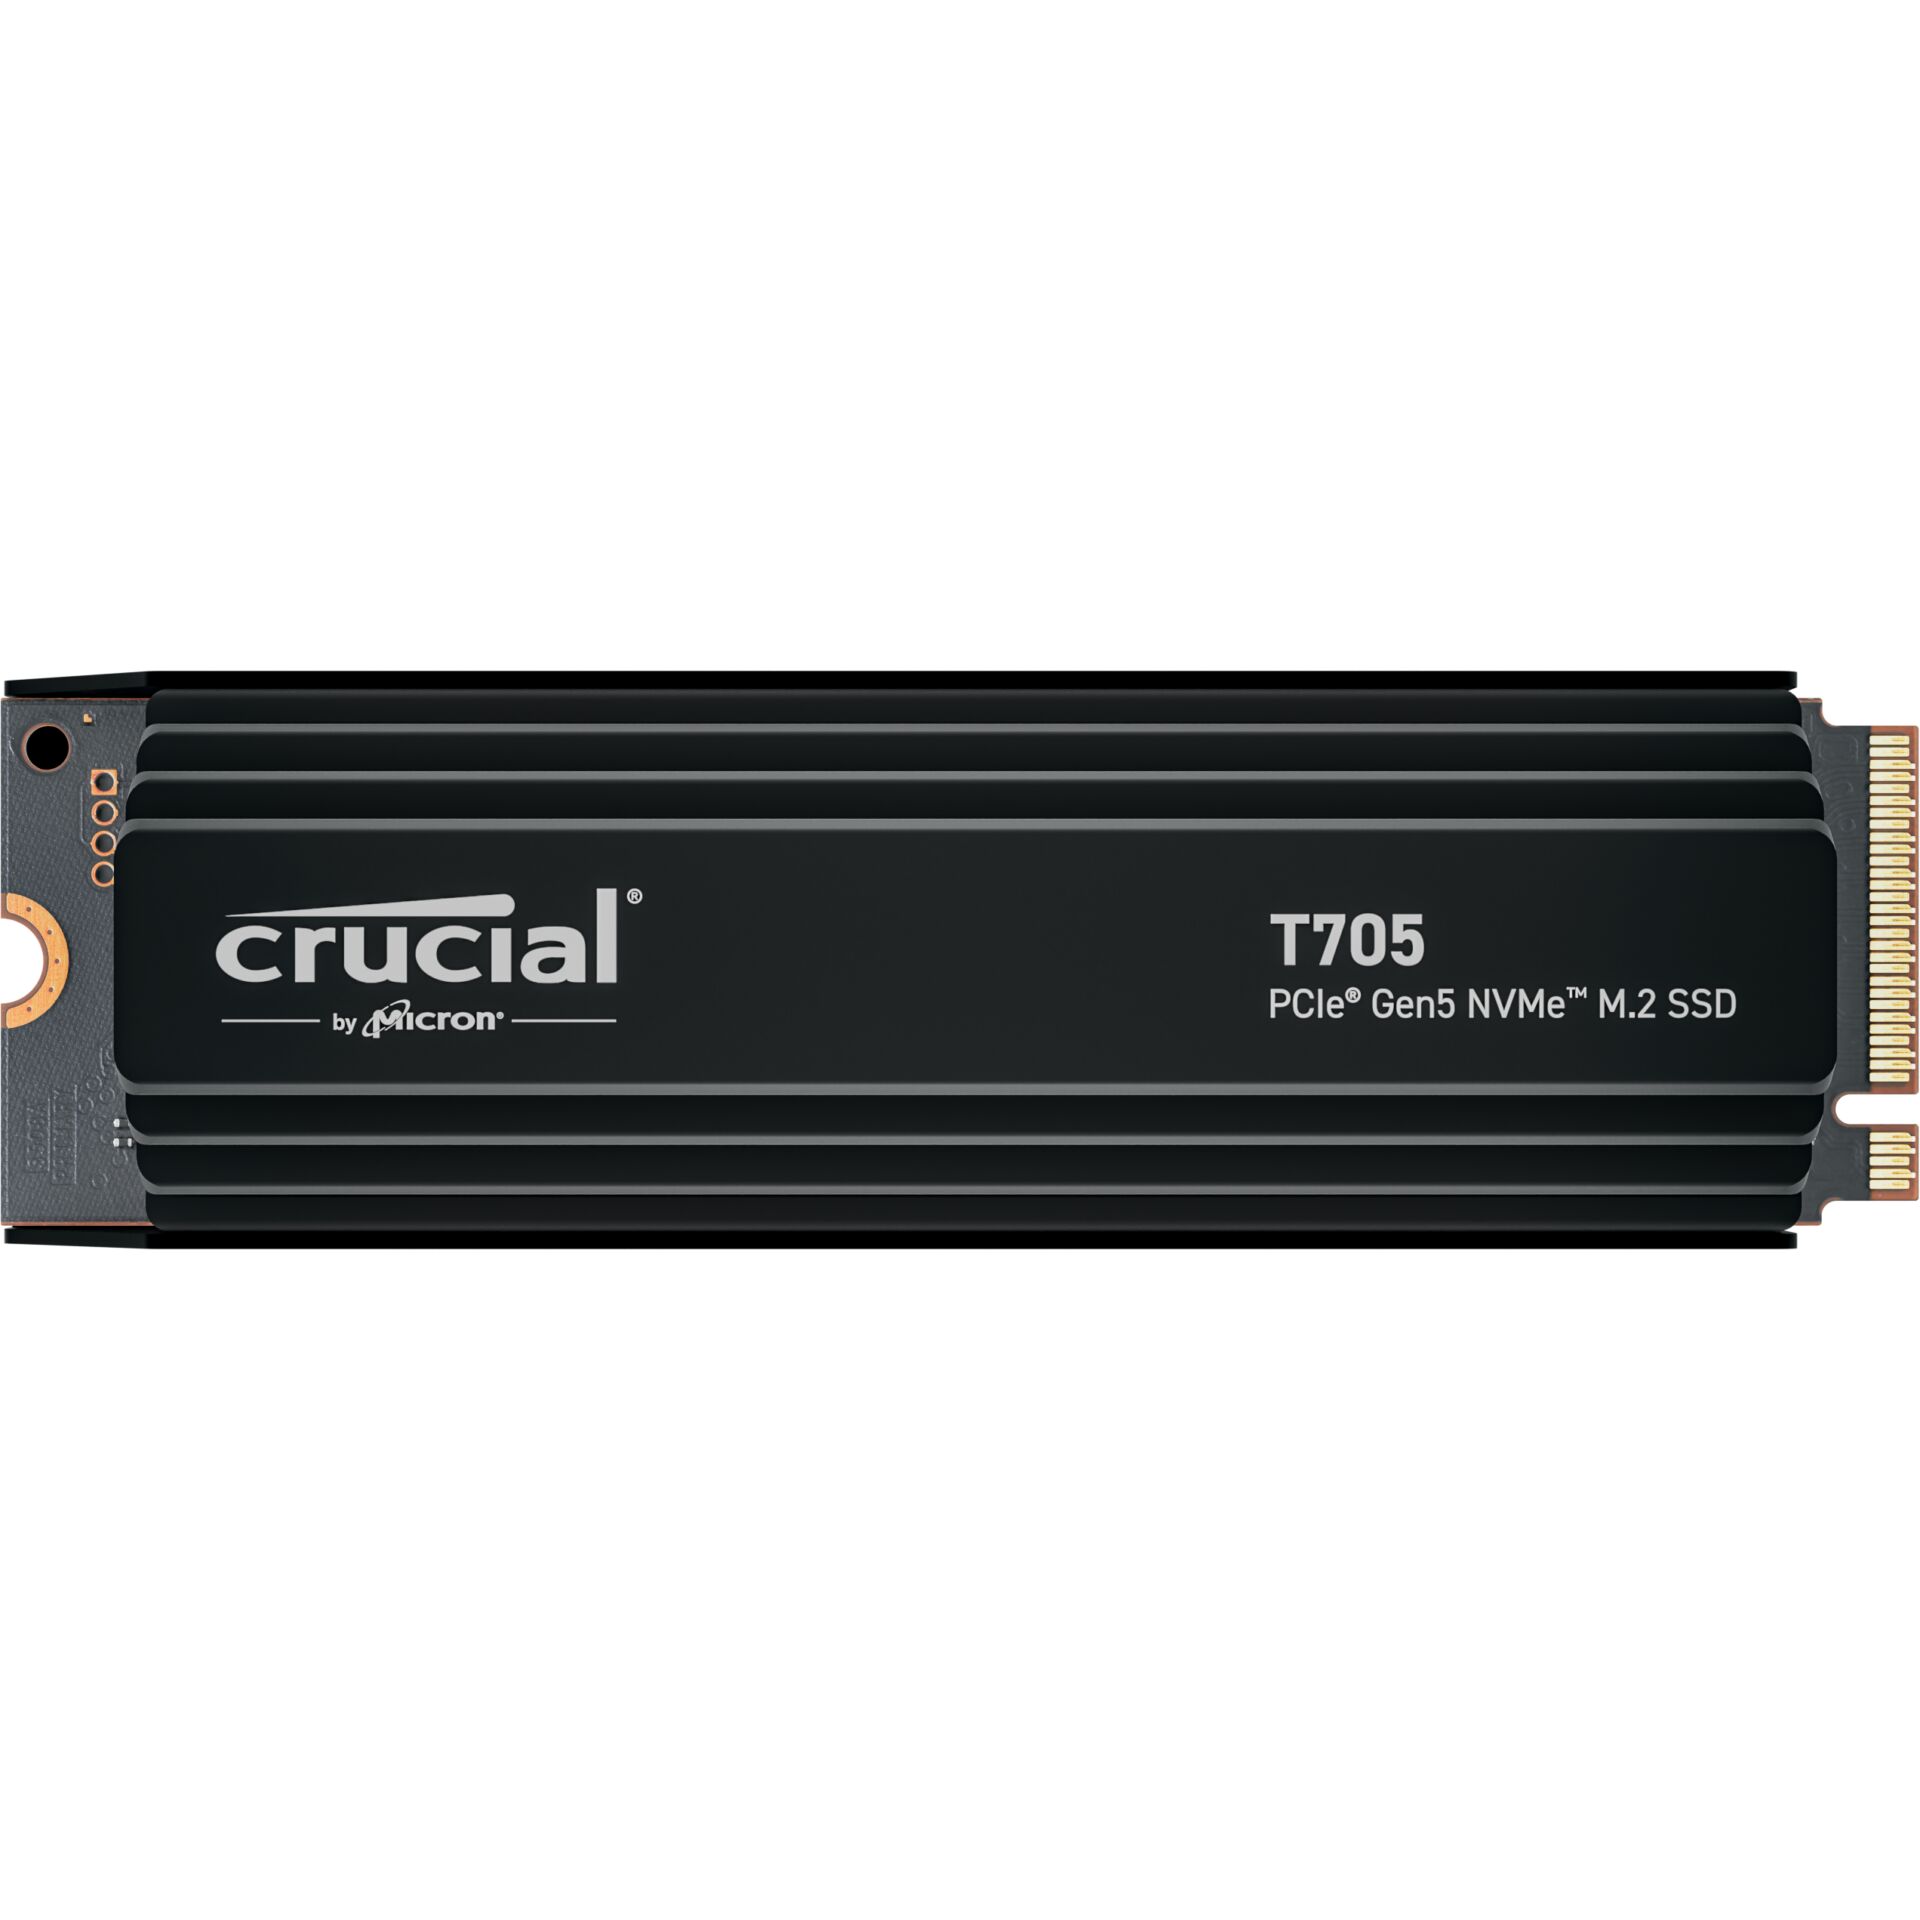 1.0 TB SSD Crucial T705 SSD, M.2/M-Key (PCIe 5.0 x4), lesen: 13600MB/s, schreiben: 10200MB/s SLC-Cached, TBW: 600T